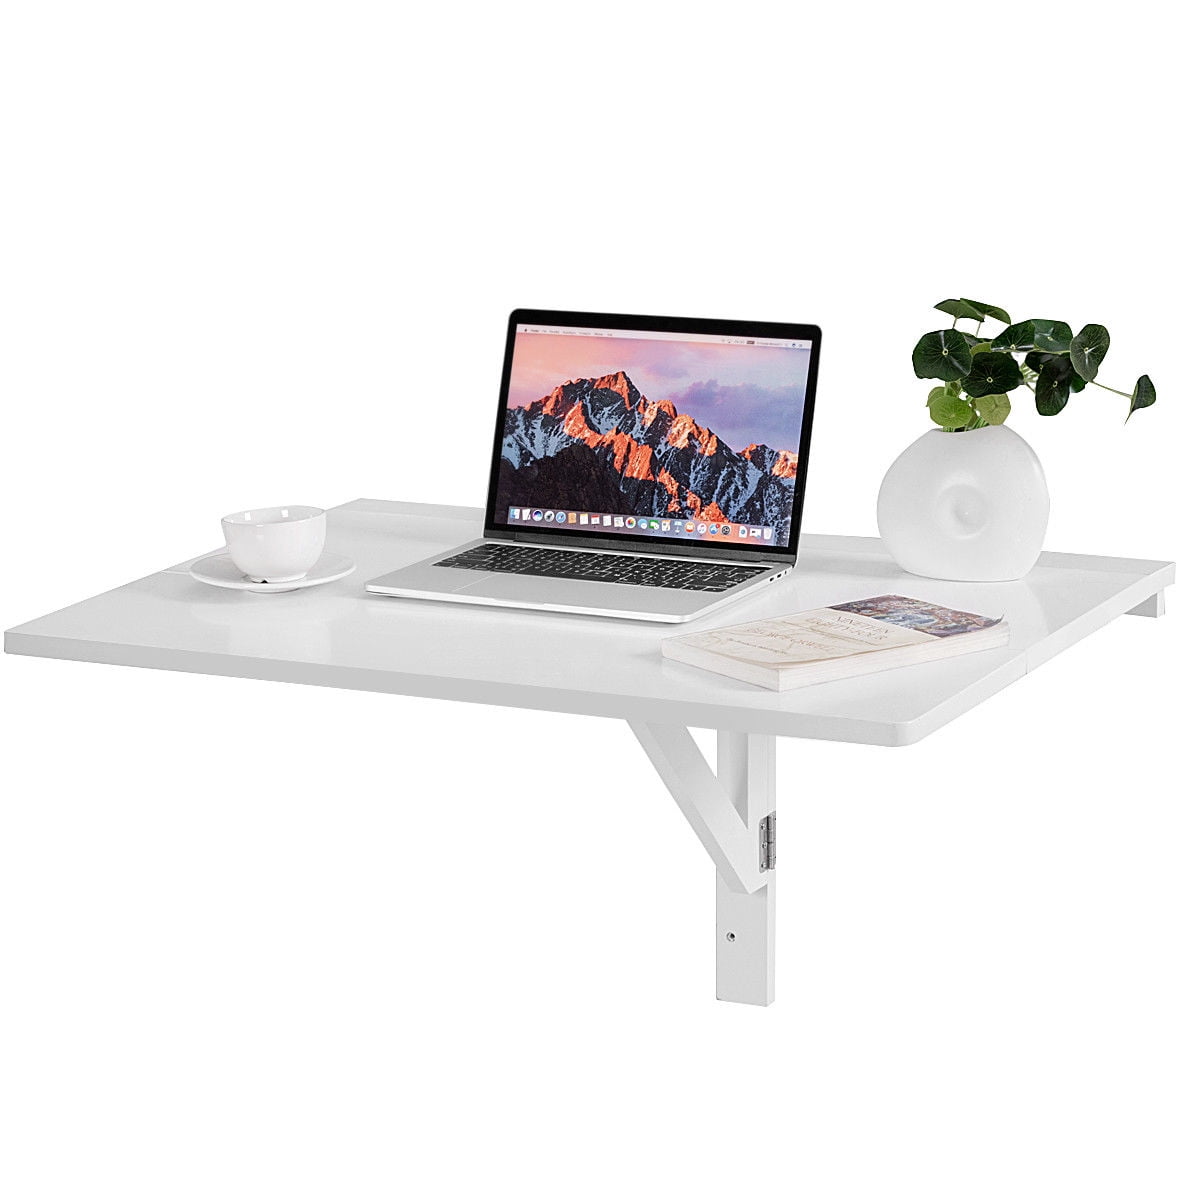 LXJYMX Computer Desk Wall-Mounted Laptop Table Folding Table Color : Redwood Study Table Simple Desk